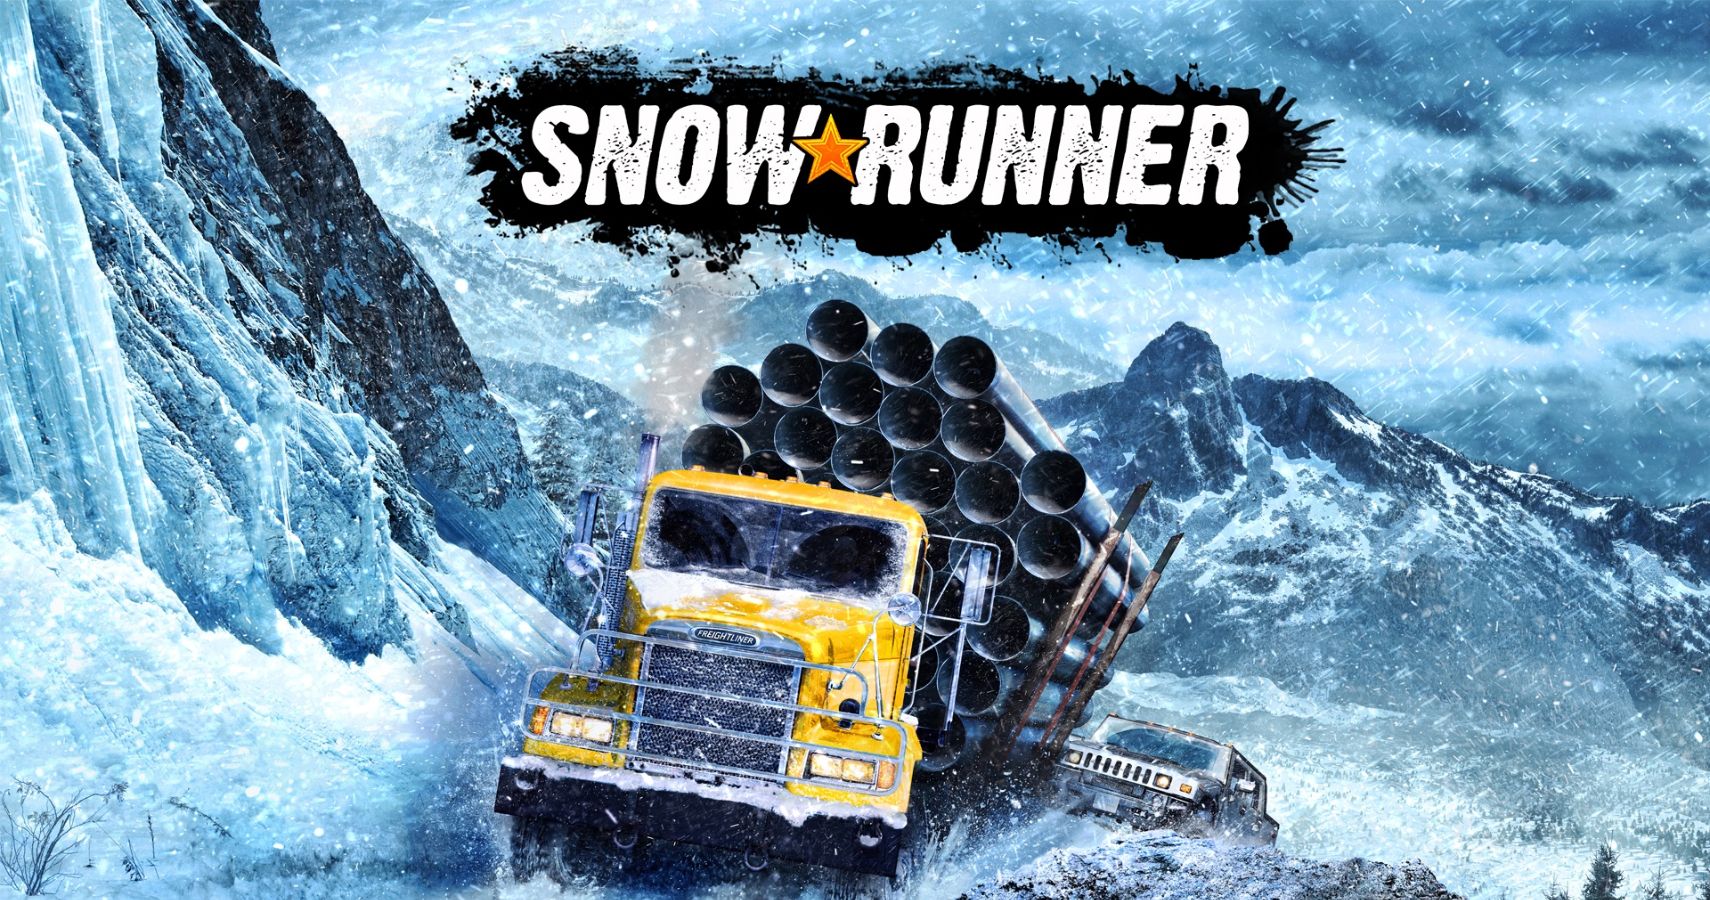 SnowRunner Trucks Its Way To Steam And Microsoft Store Next Month